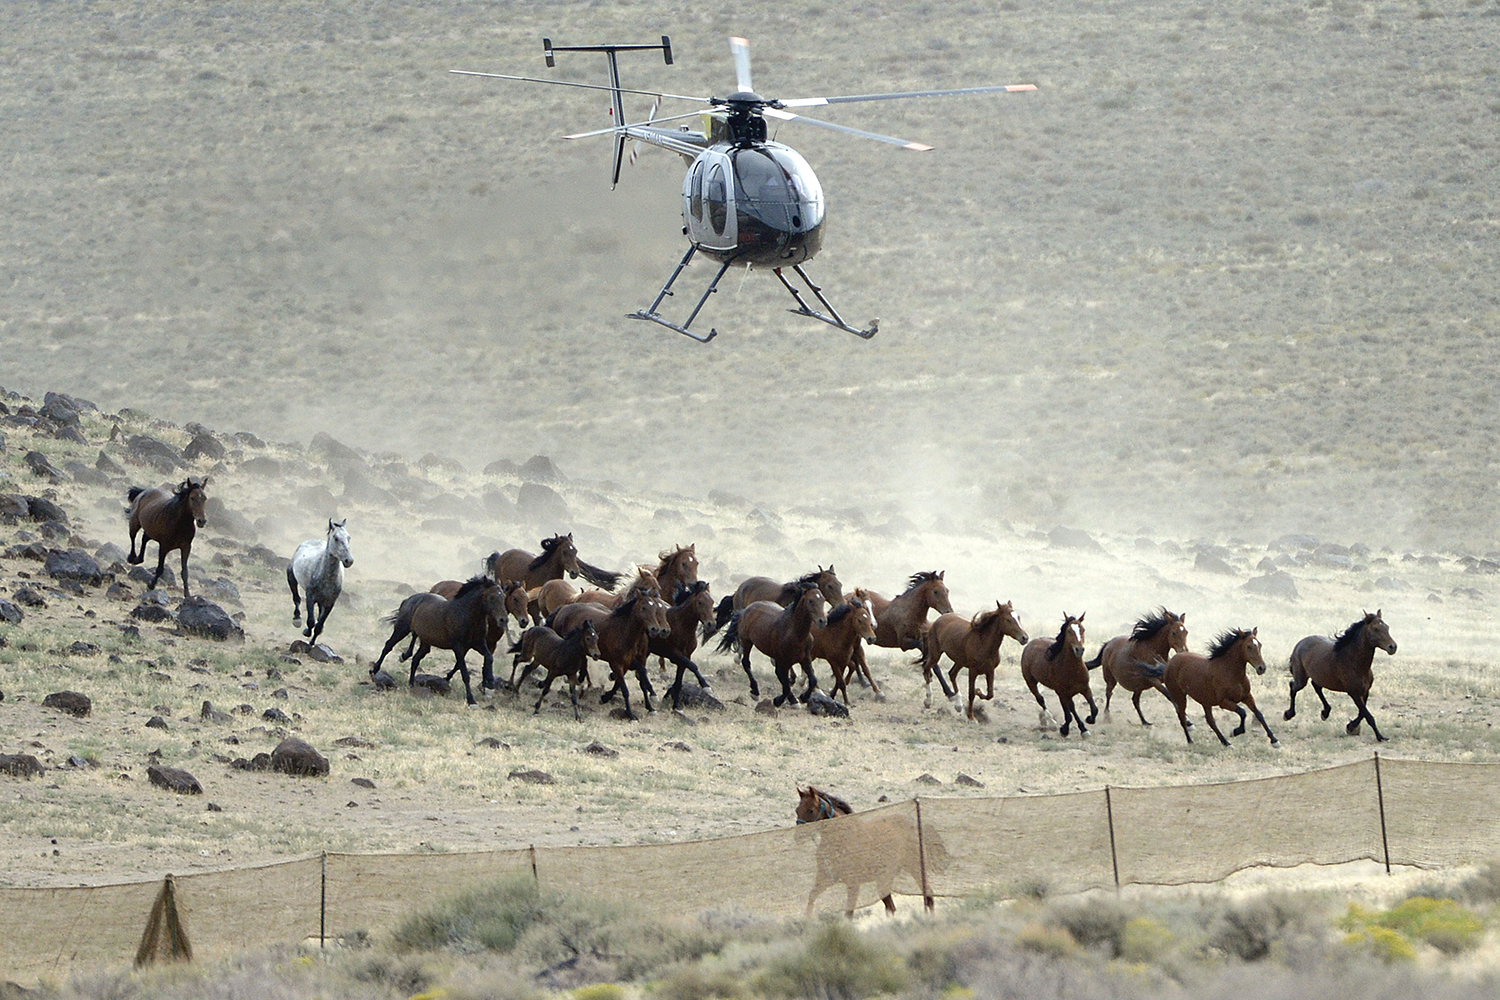 helicopter pushes horses